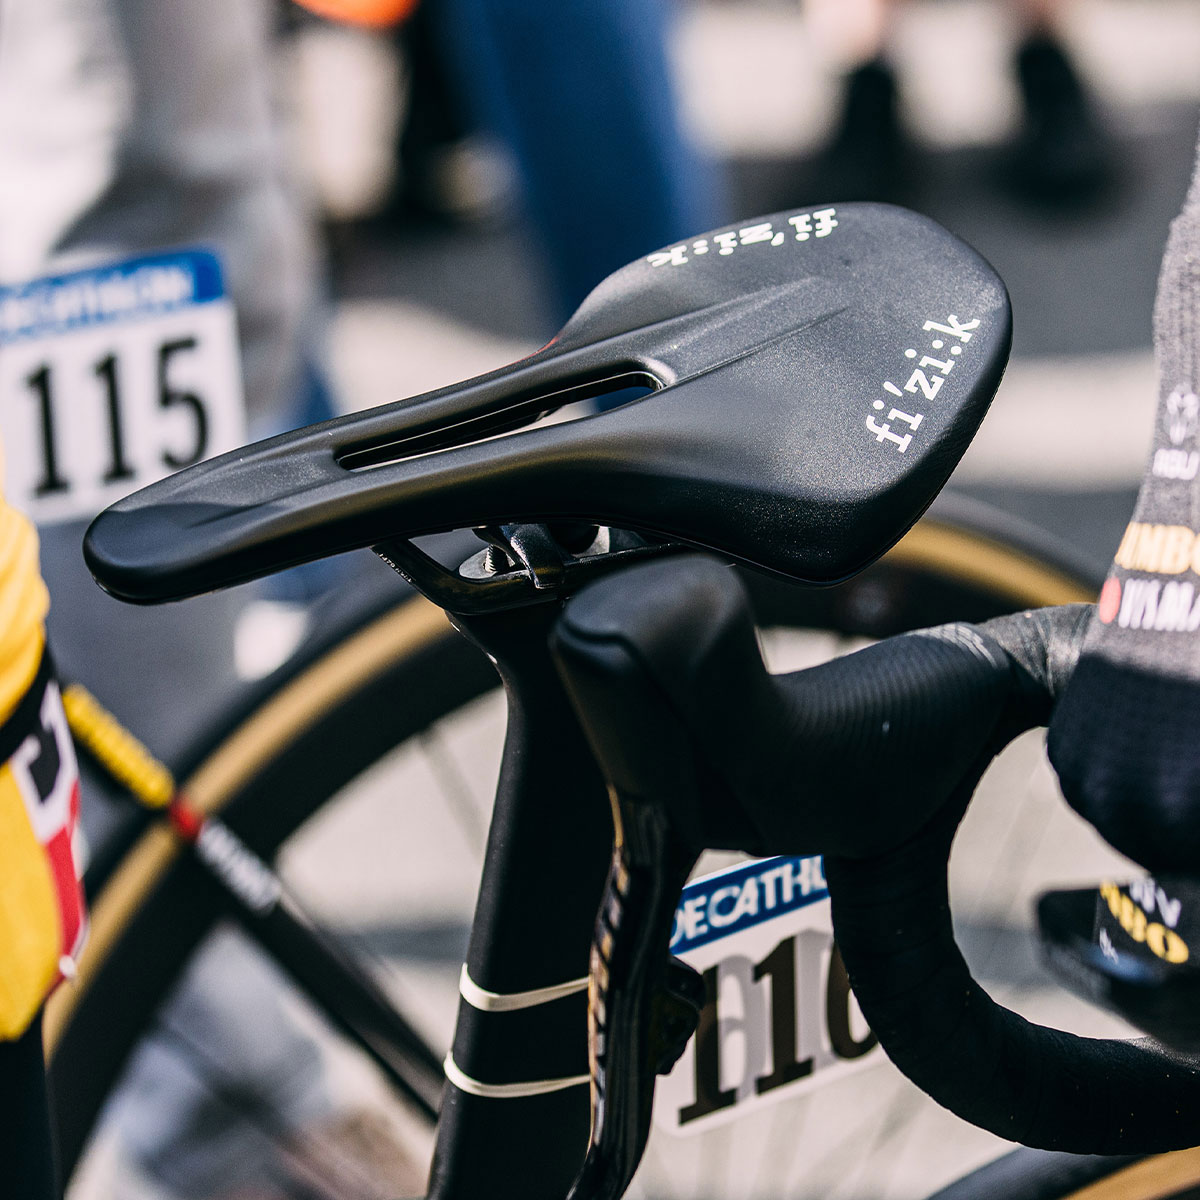 fizik-vento-antares-range-performance-carbon-saddle-for-road-competitions